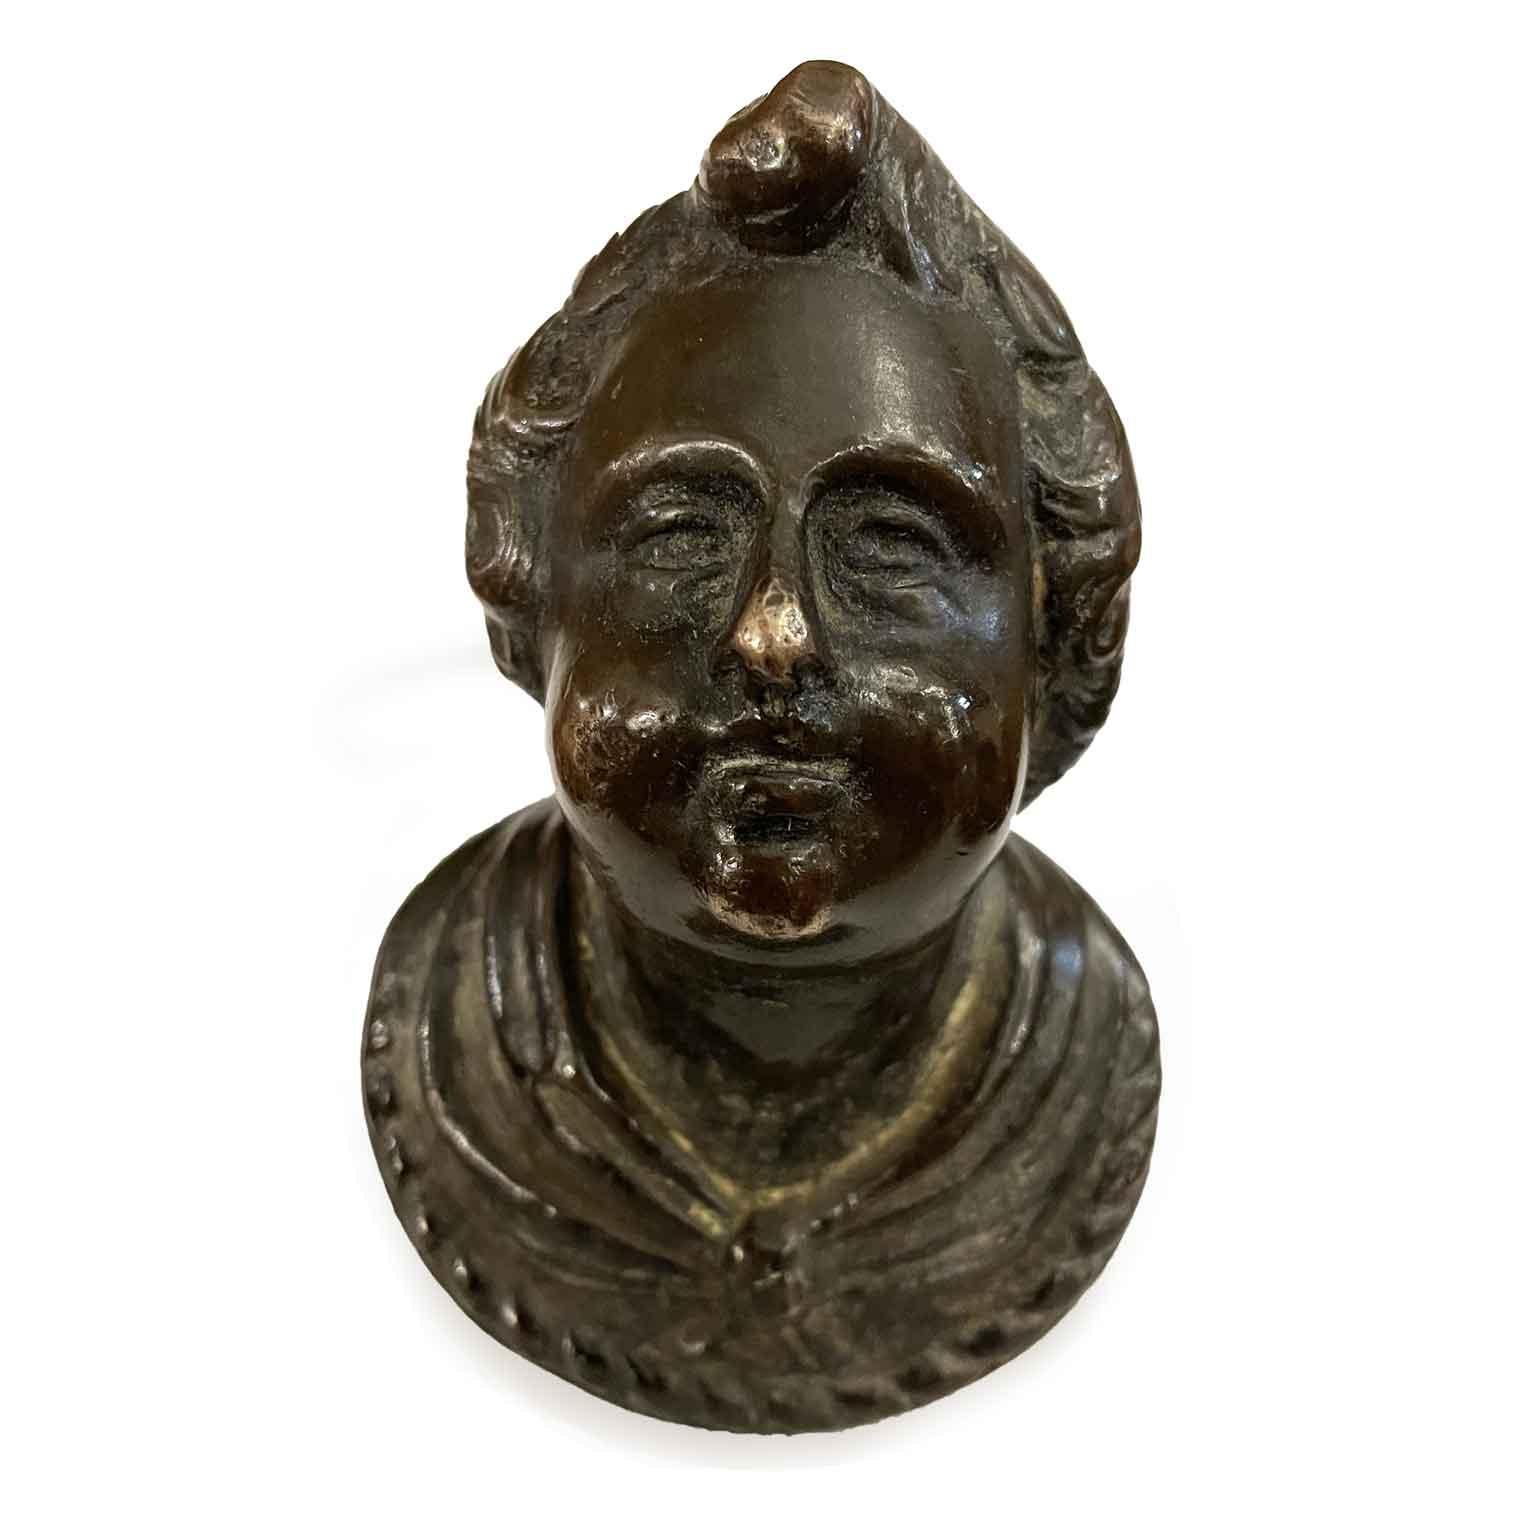 Bronze Bust Of 1600s, cast depicting a young boy with curly hair and a gathered robe over his neck ending in an oval section with beaded border.  This antique bronze knob of Italian origin in the shape of a human head was used as a handle in period